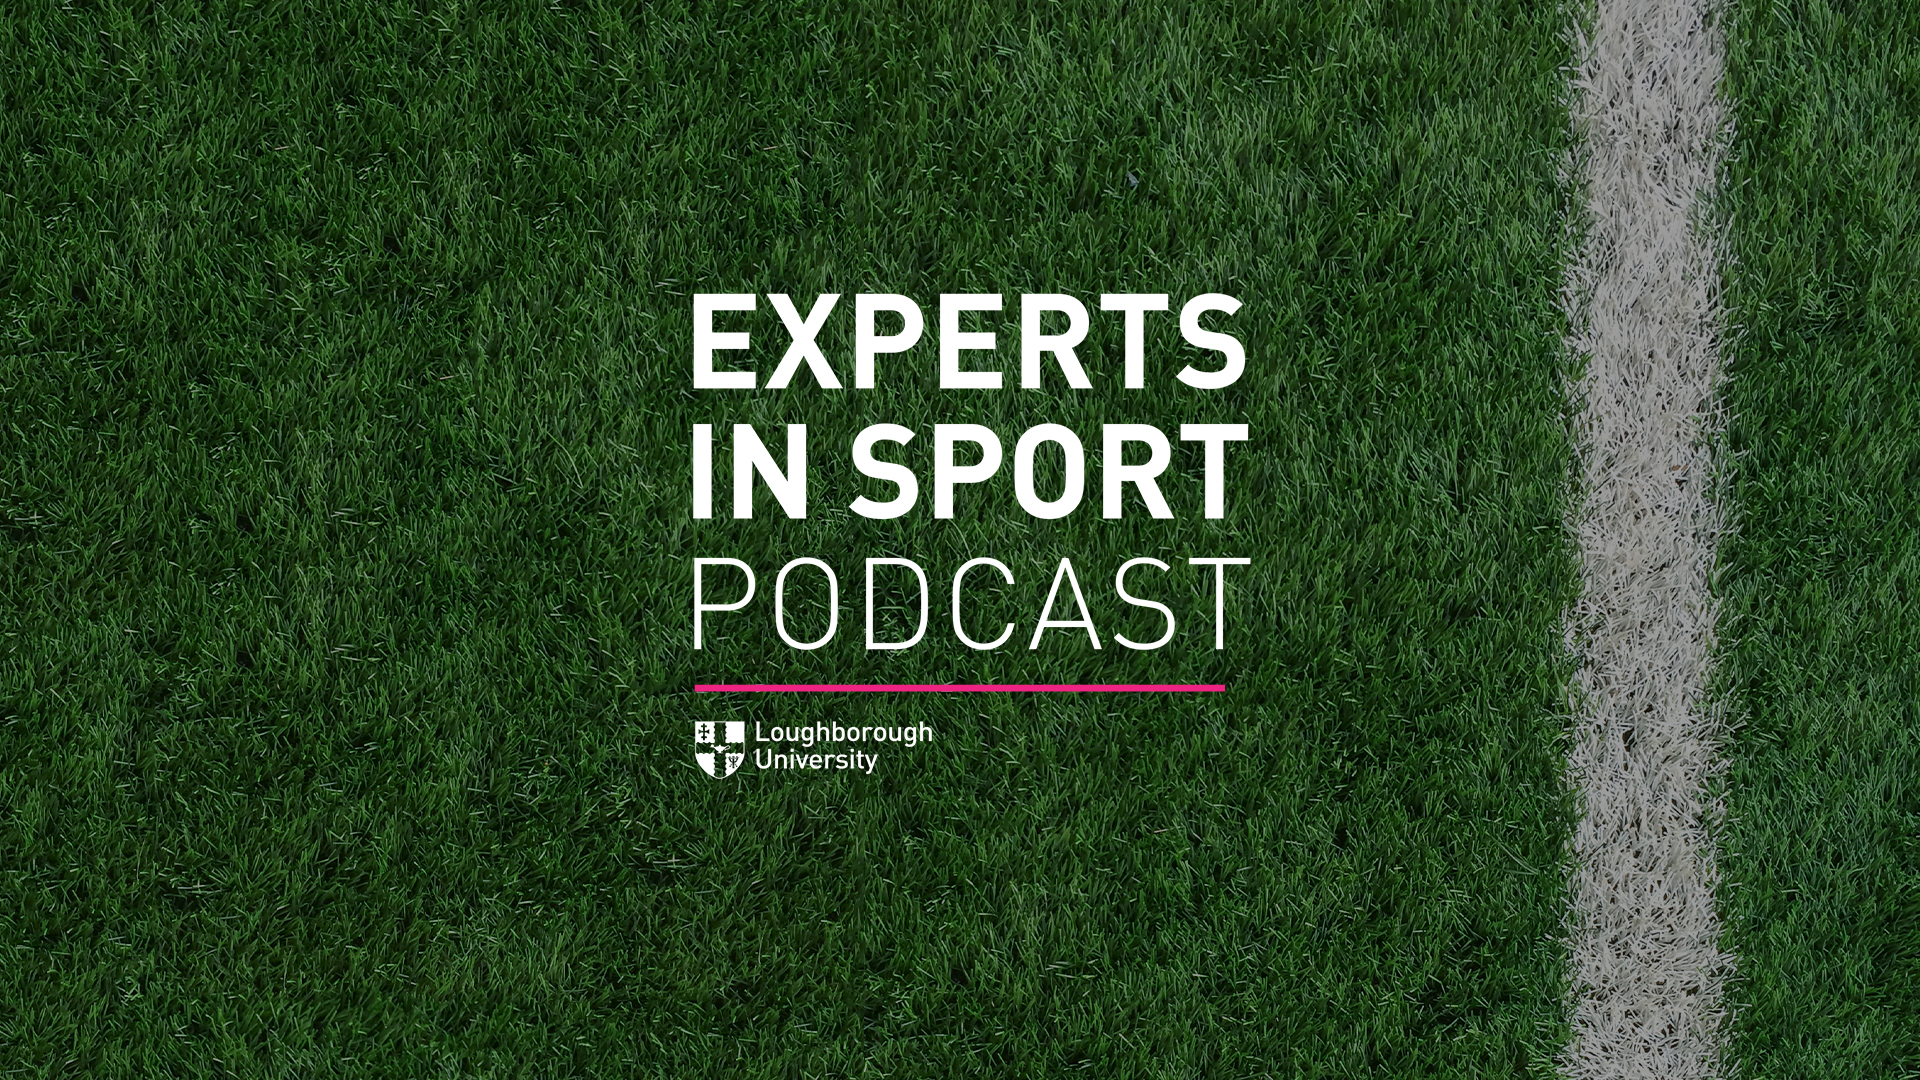 Image of a football field with the Experts in Sport logo overlaid